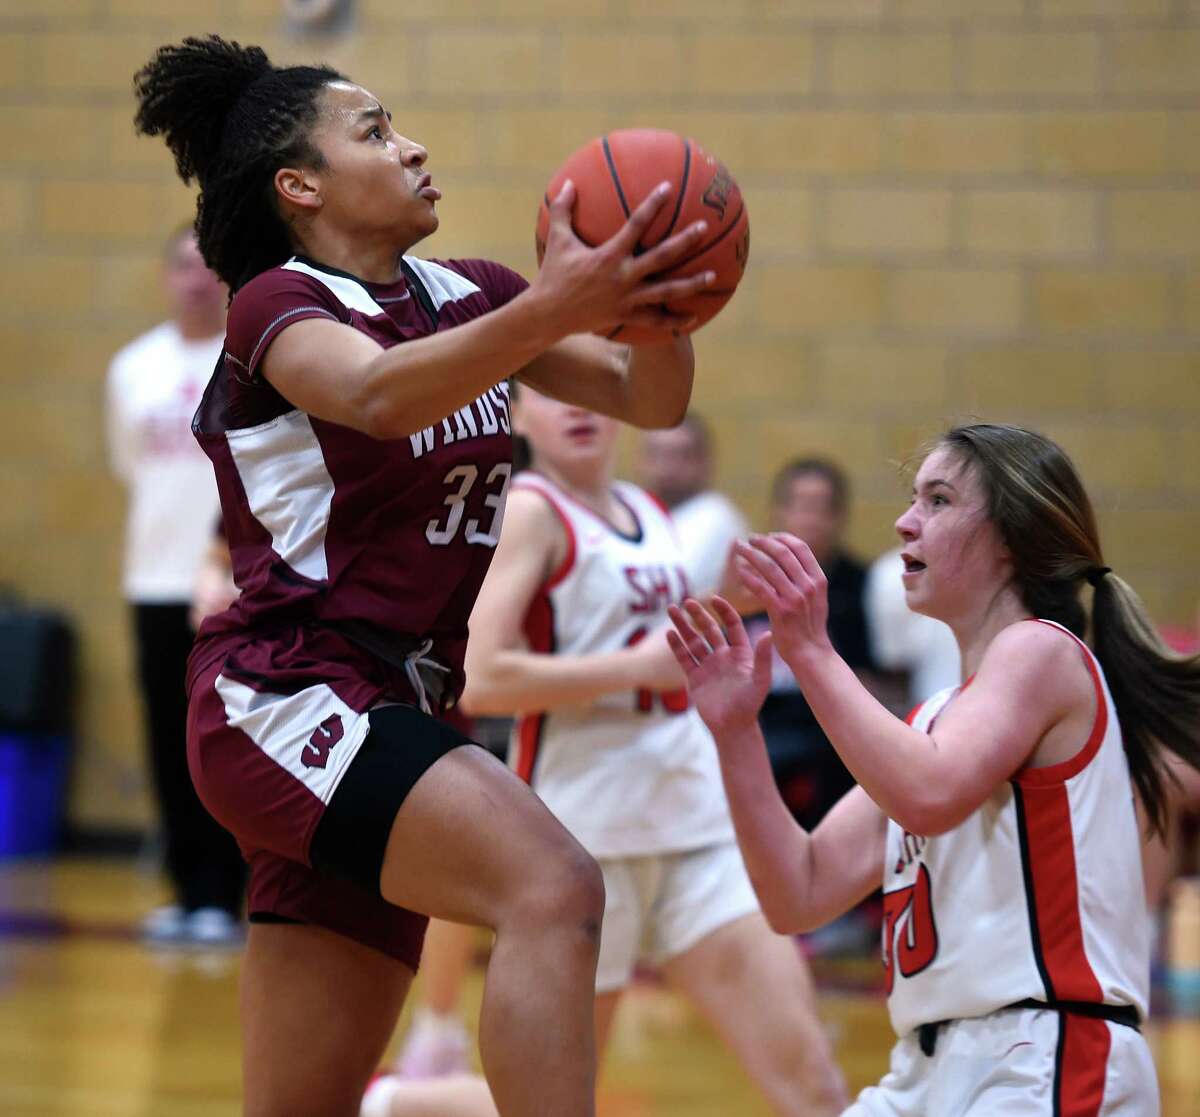 Ayanna Franks of Windsor drives to the basket against Sacred Hearst Academy in the first half in Hamden on January 18, 2023.